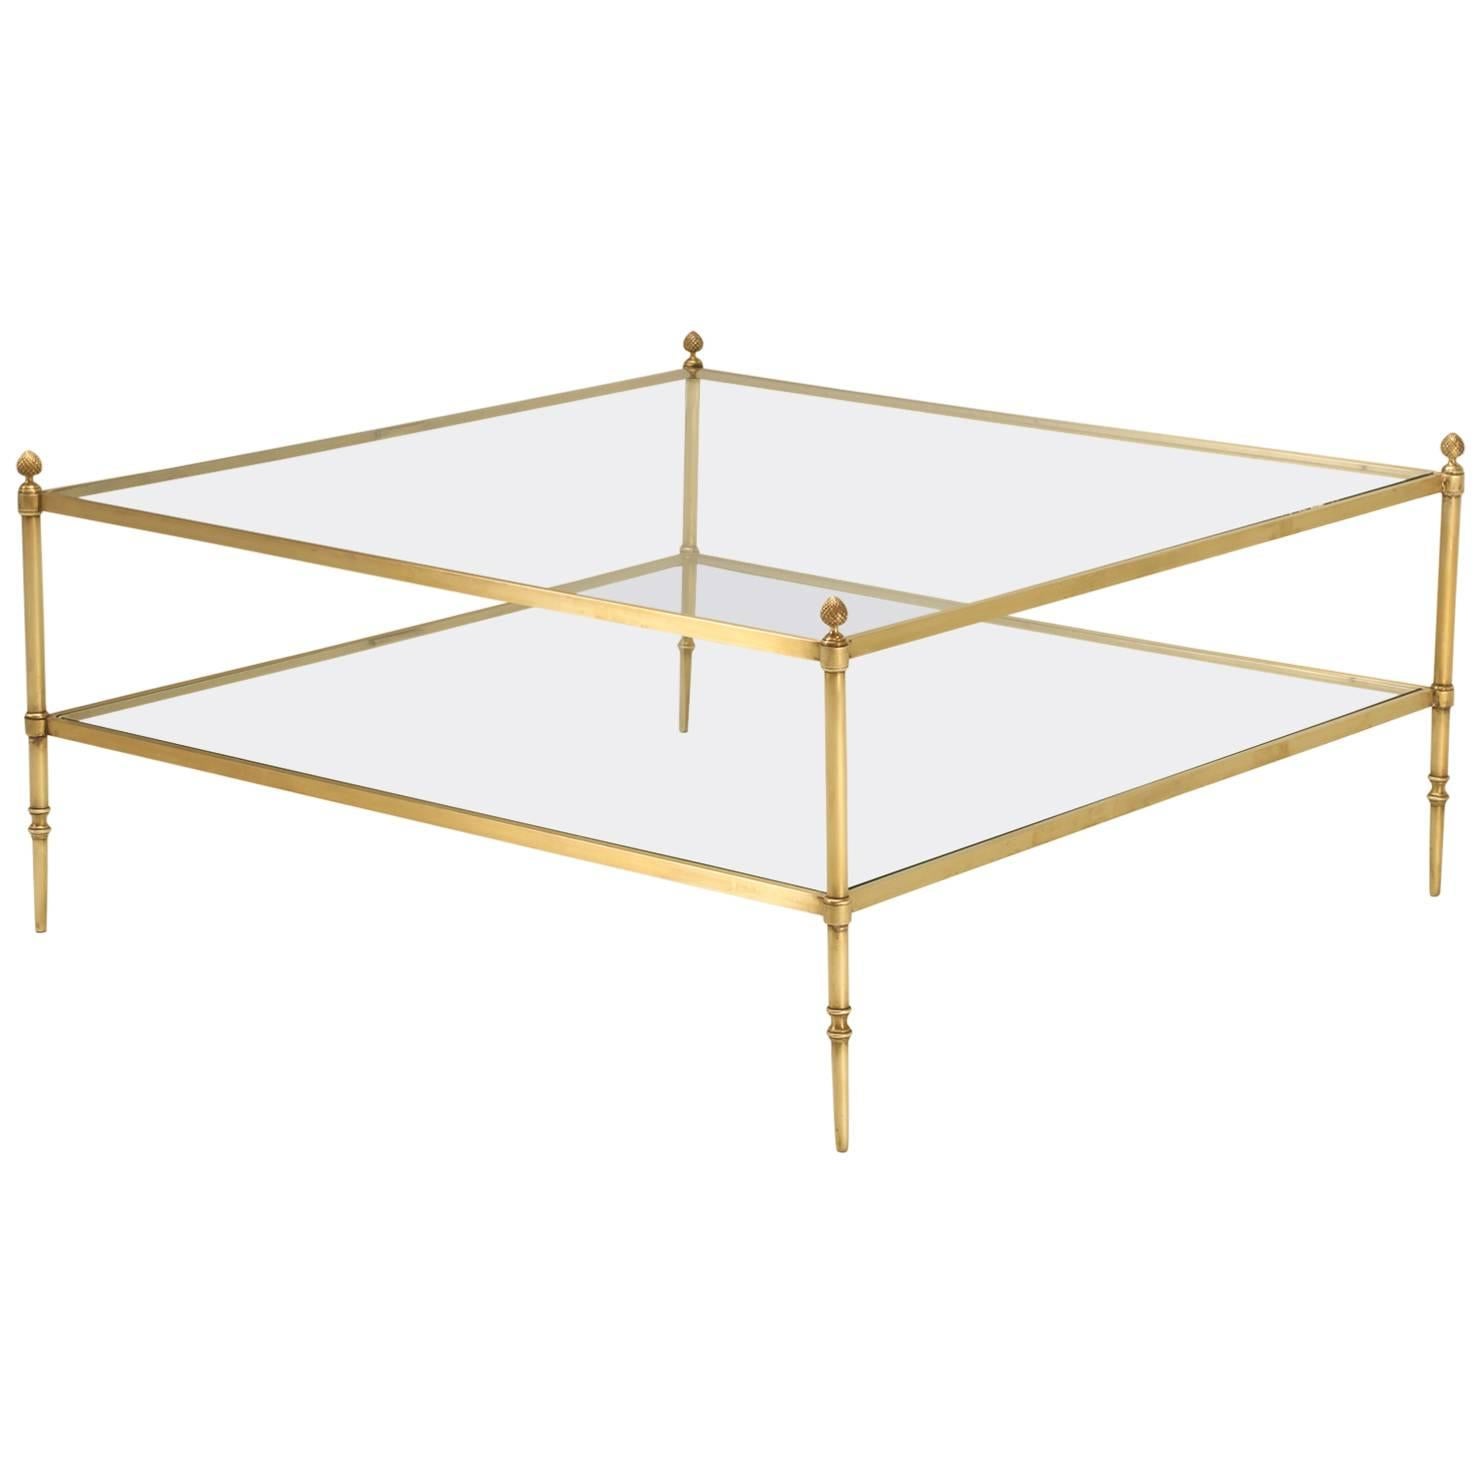 French Brass and Glass Mid-Century Modern Coffee Table